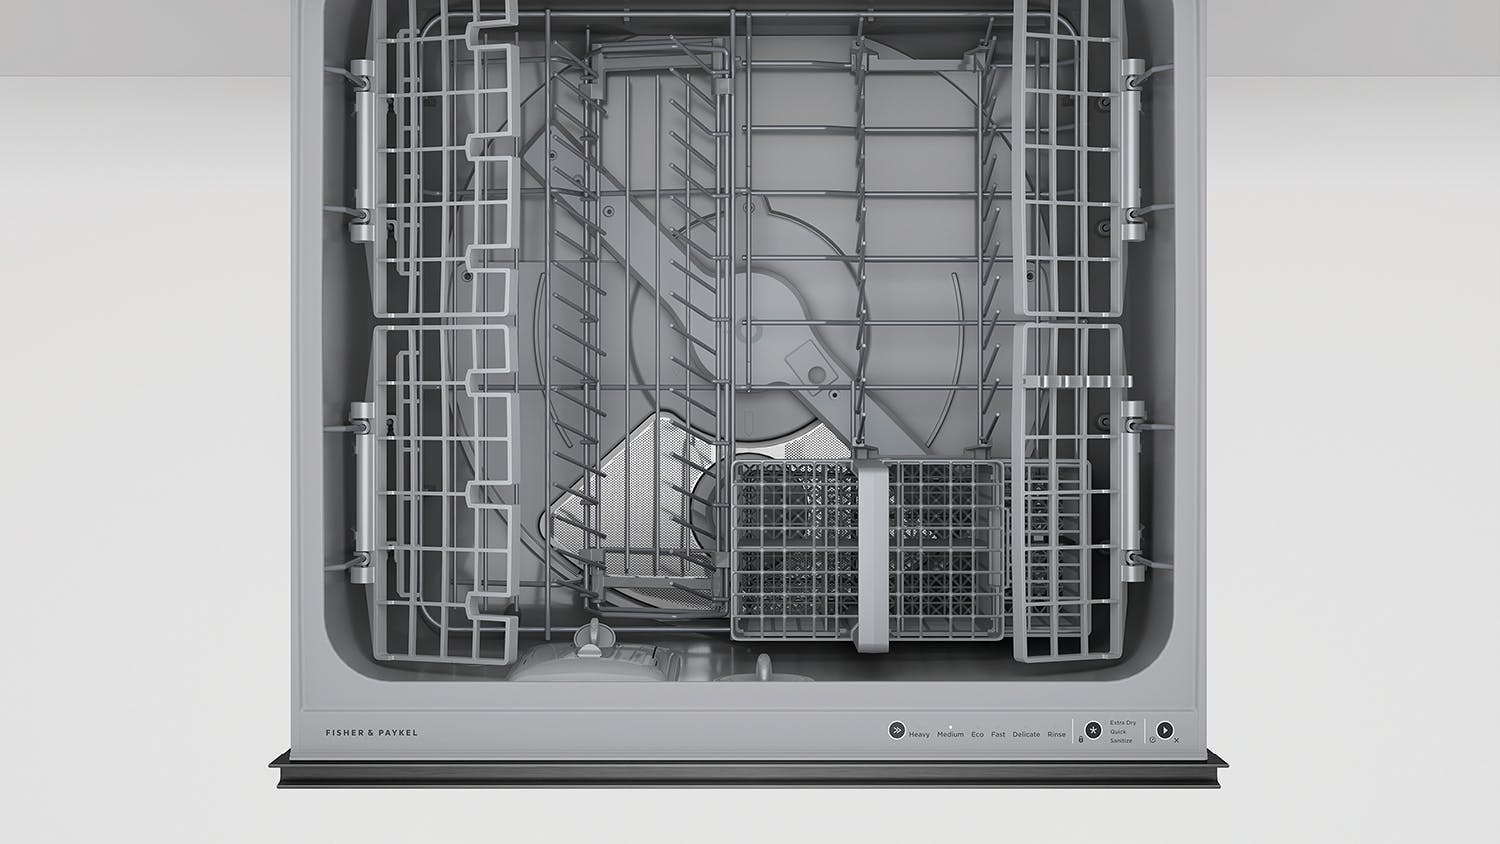 Fisher and Paykel Built-In Tall Double Drawer Dishwasher with 14 Place  Settings in EZKleen Stainless Steel